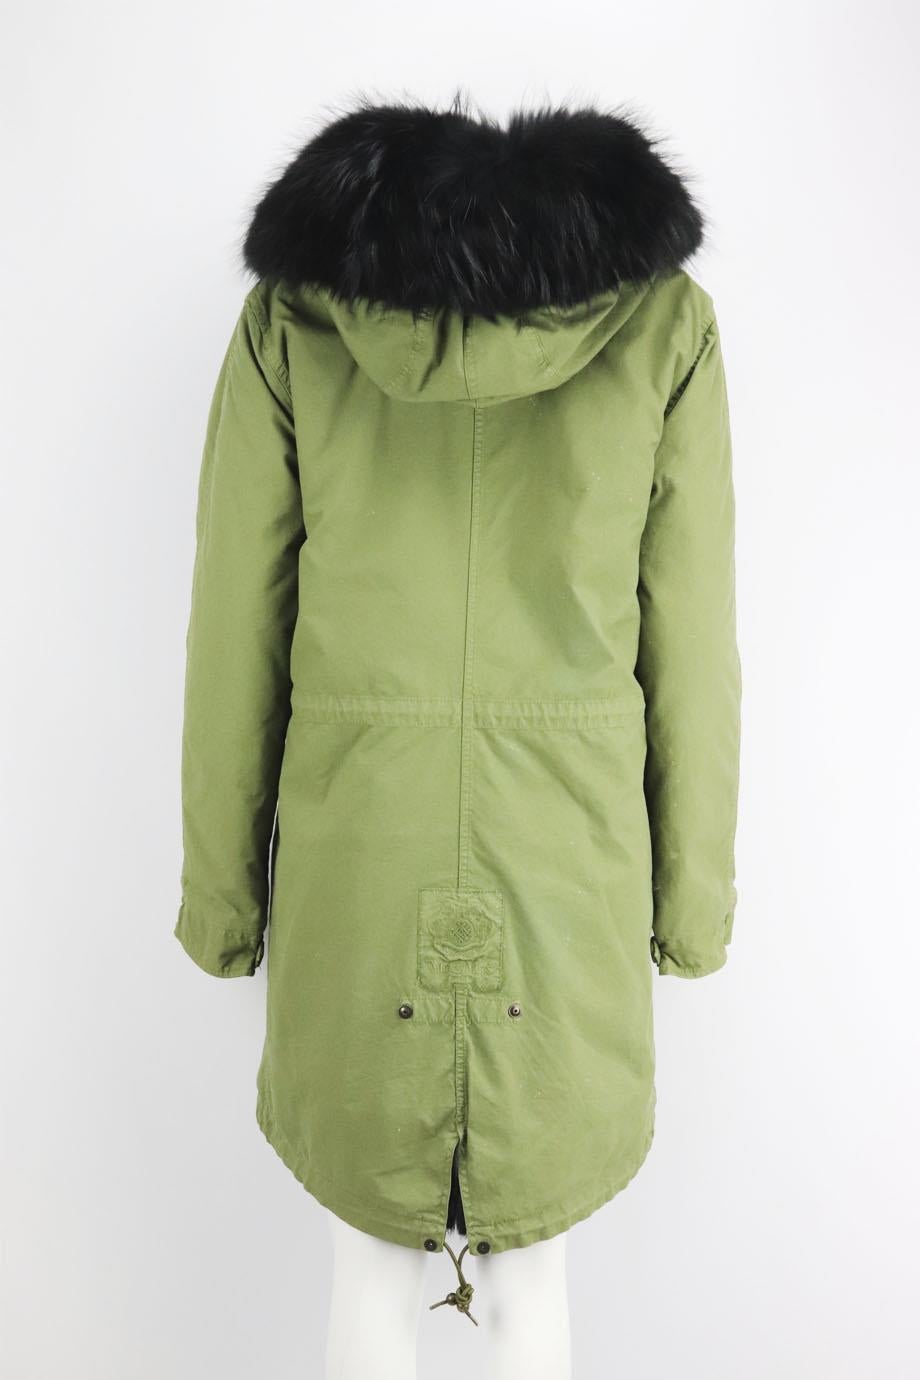 Mr And Mrs Italy Rabbit And Raccoon Fur Lined Cotton Canvas Parka Coat Medium In Excellent Condition In London, GB